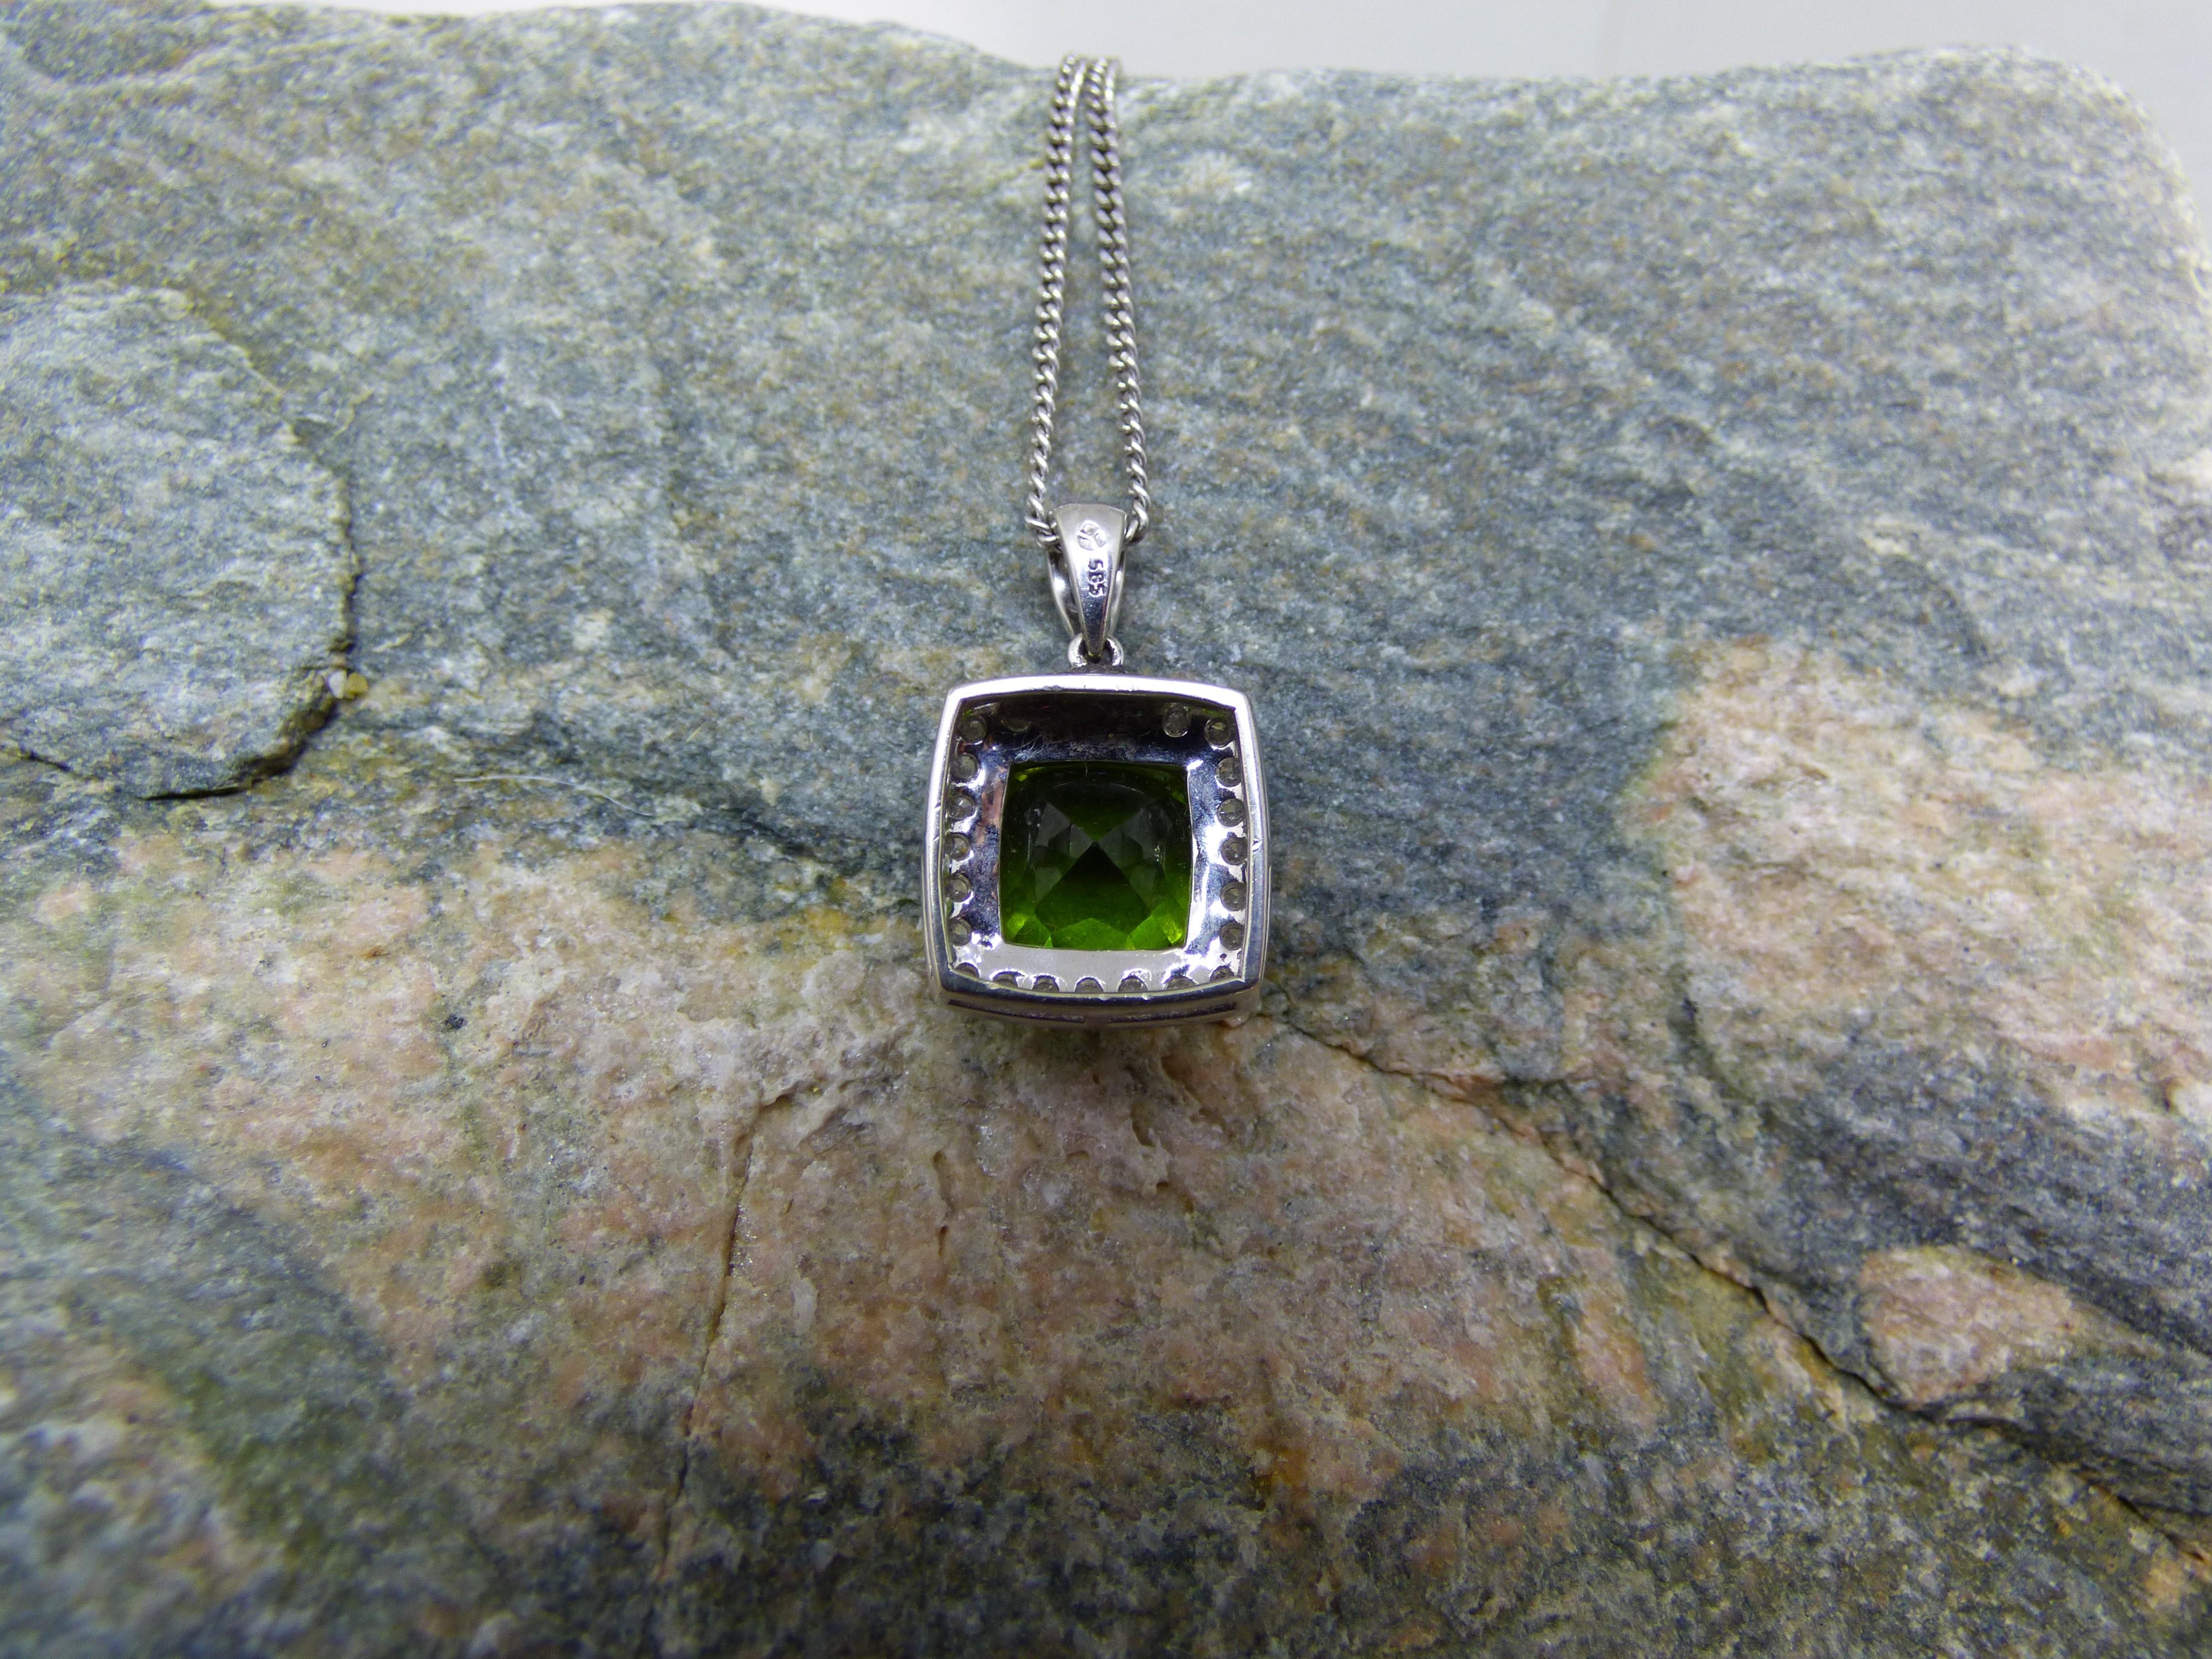 Women's 4.5ct. Cushion Cut Peridot and Diamond Pendant in 14K White Gold. For Sale